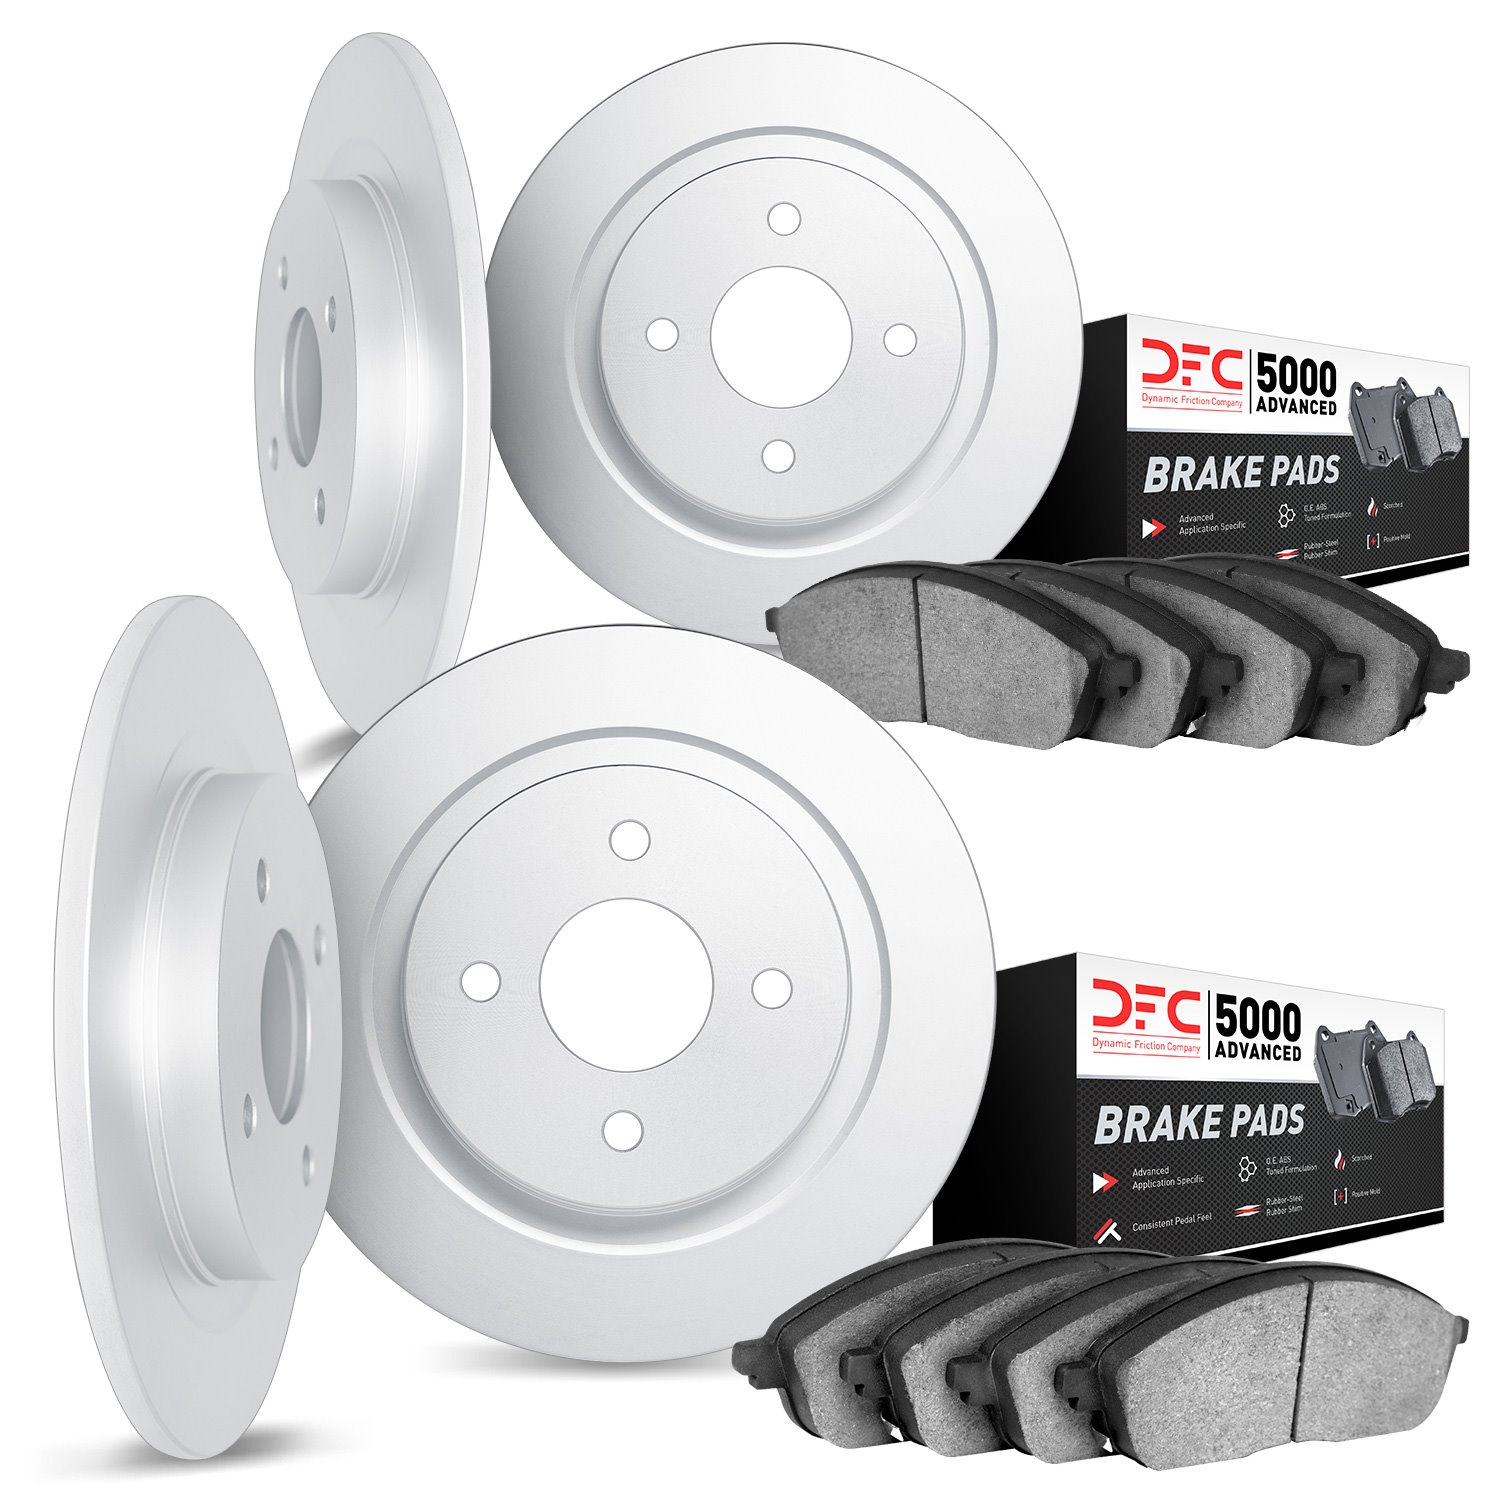 6504-28006 Brake Rotors w/5000 Advanced Brake Pads Kit, 1989-1991 Peugeot, Position: Front and Rear